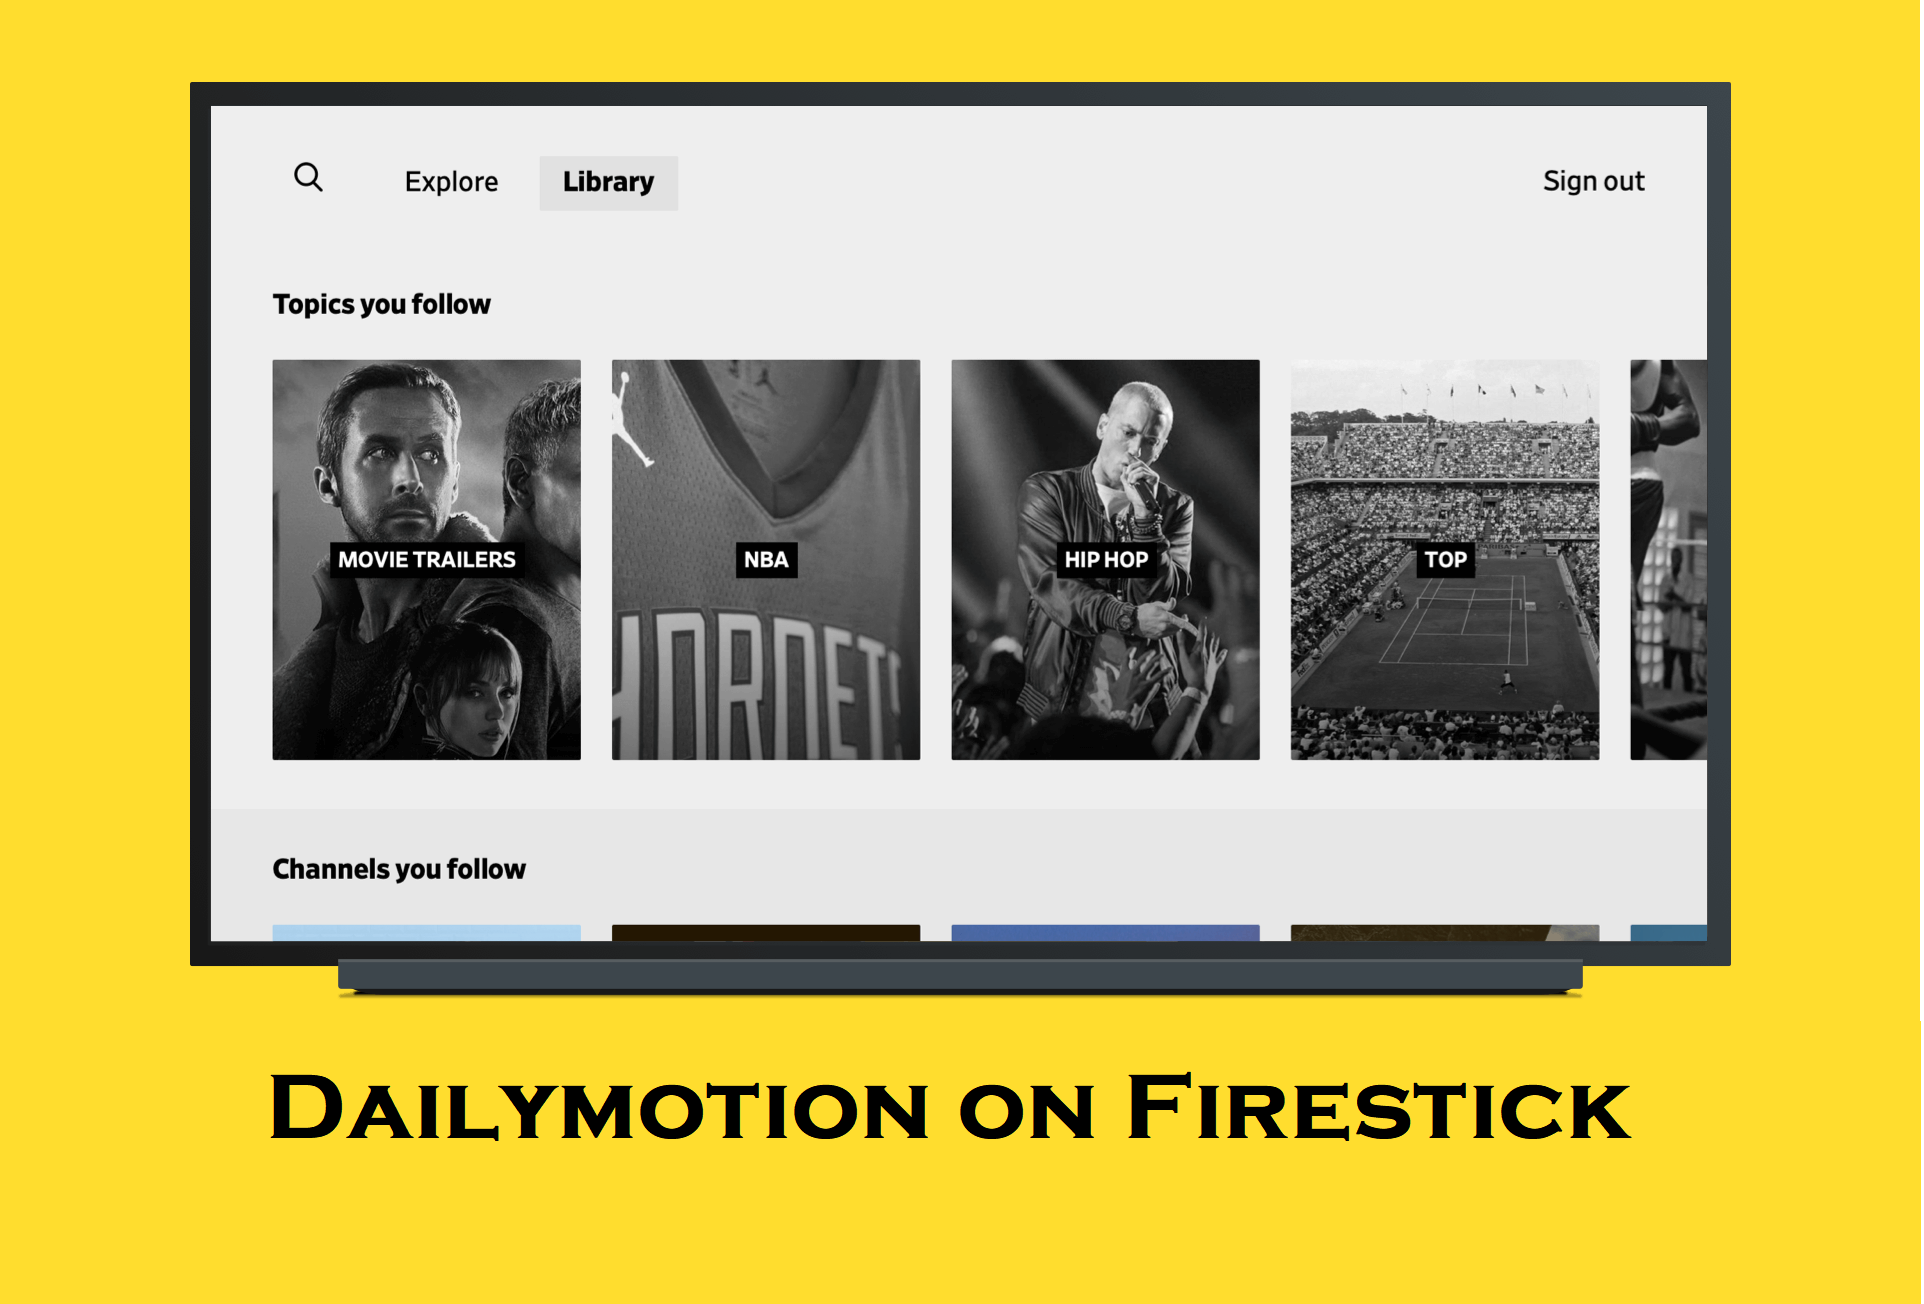 How to Install & Use Dailymotion on Firestick / Fire TV